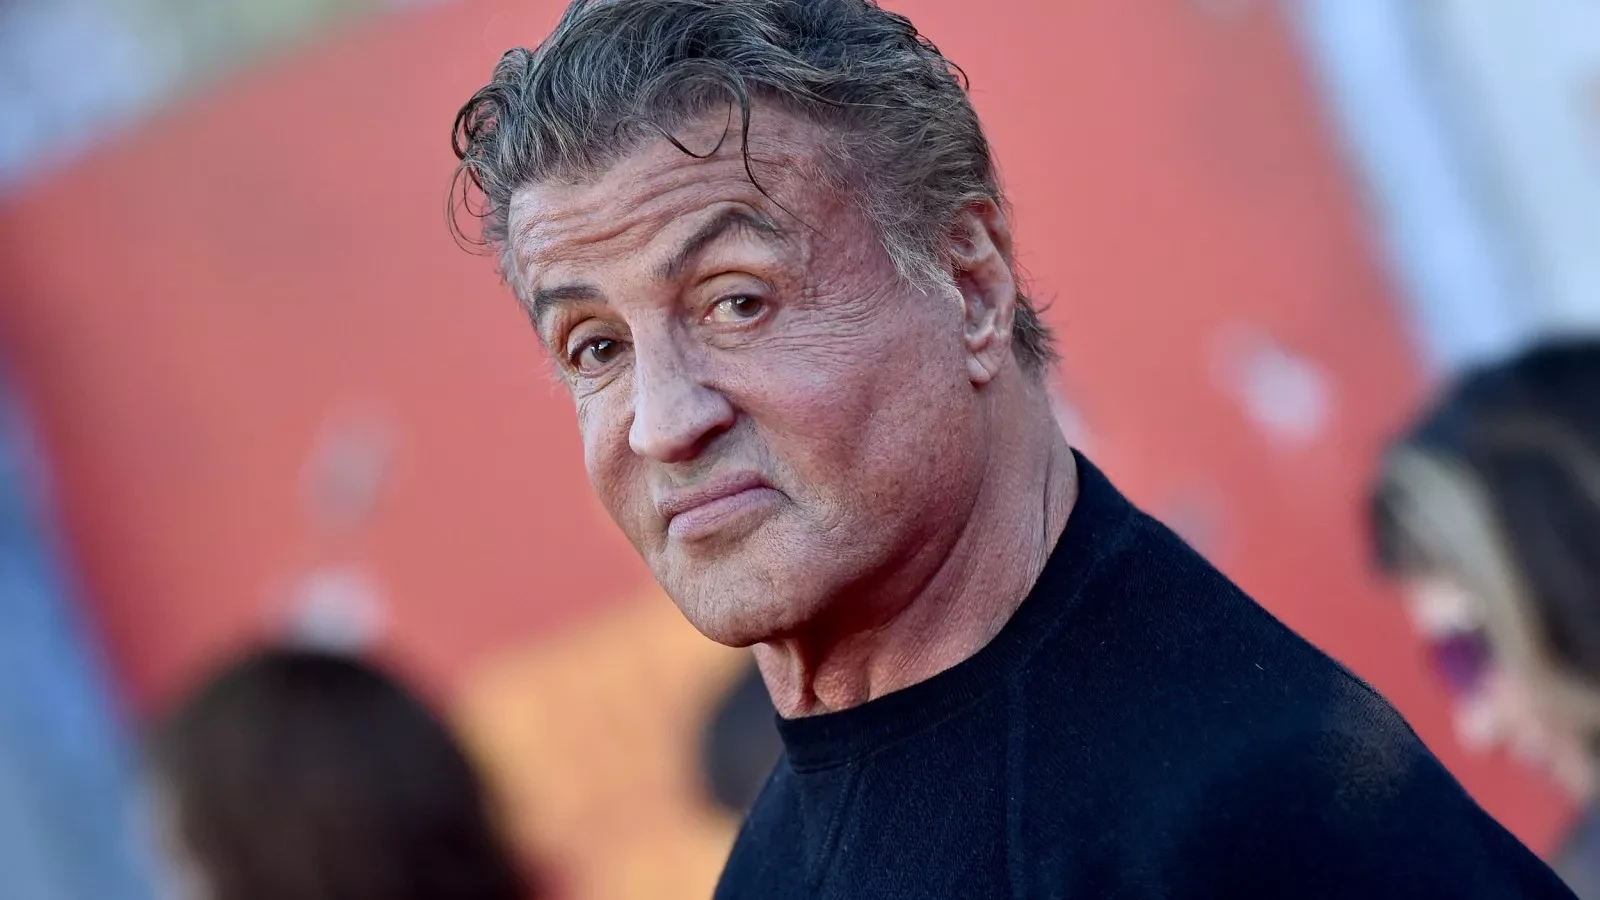 Sylvester Stallone gatecrashed the party